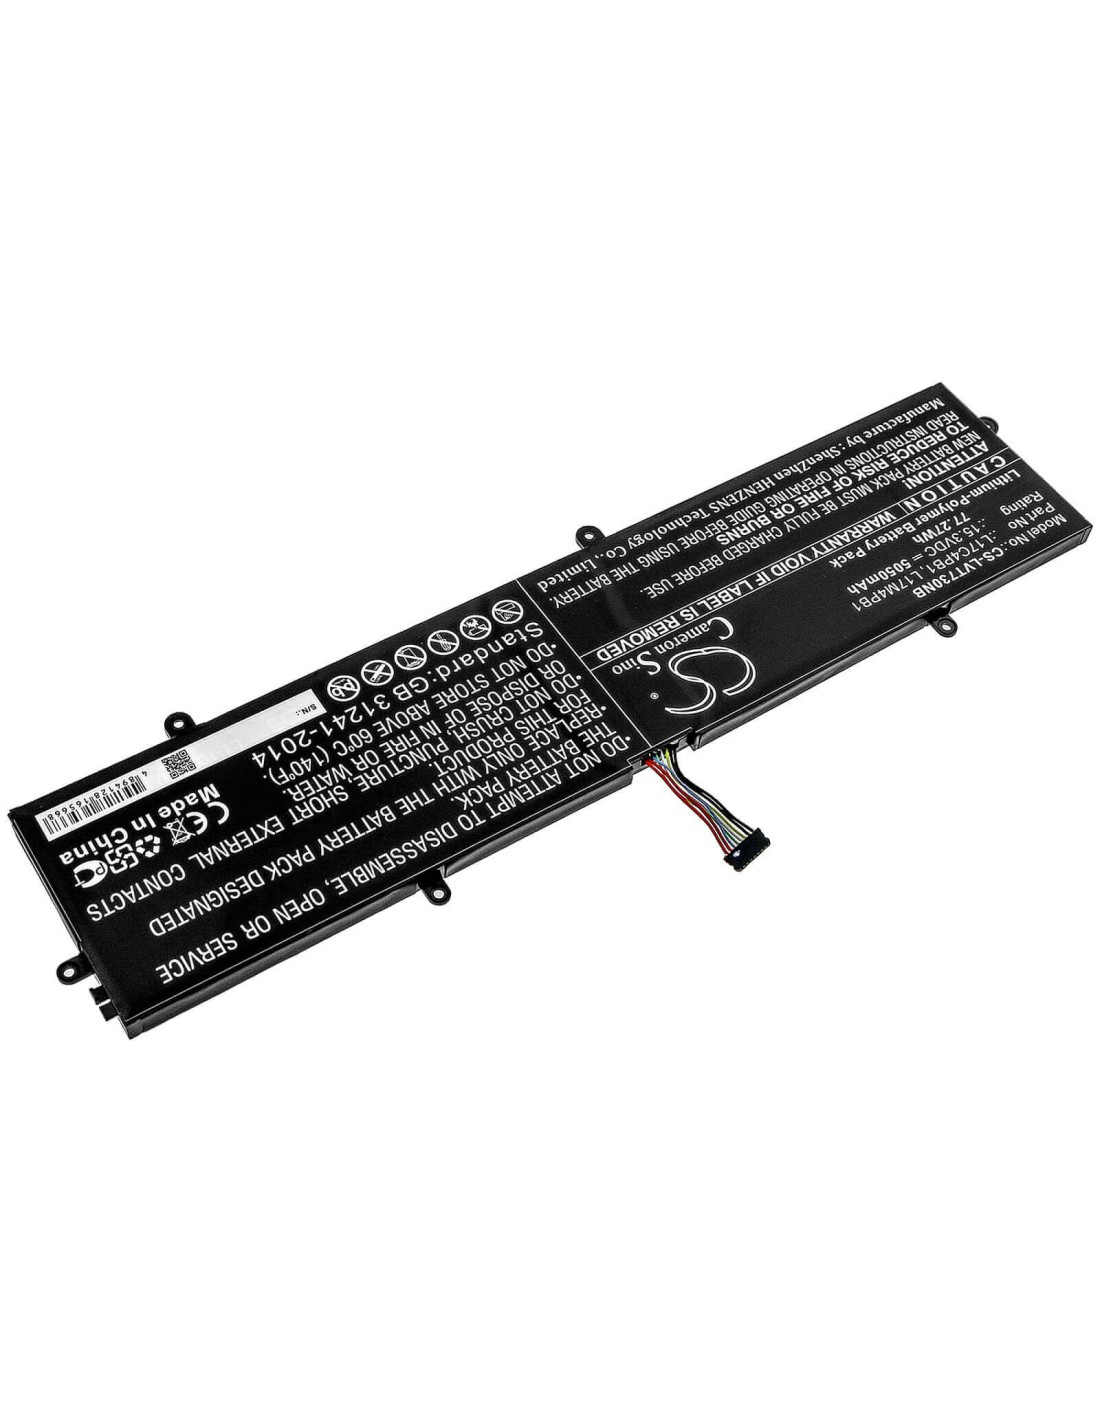 Lenovo, 720s-15, Ideapad 720s Touch-15ikb, Ideapad 720s-15 replacement  battery